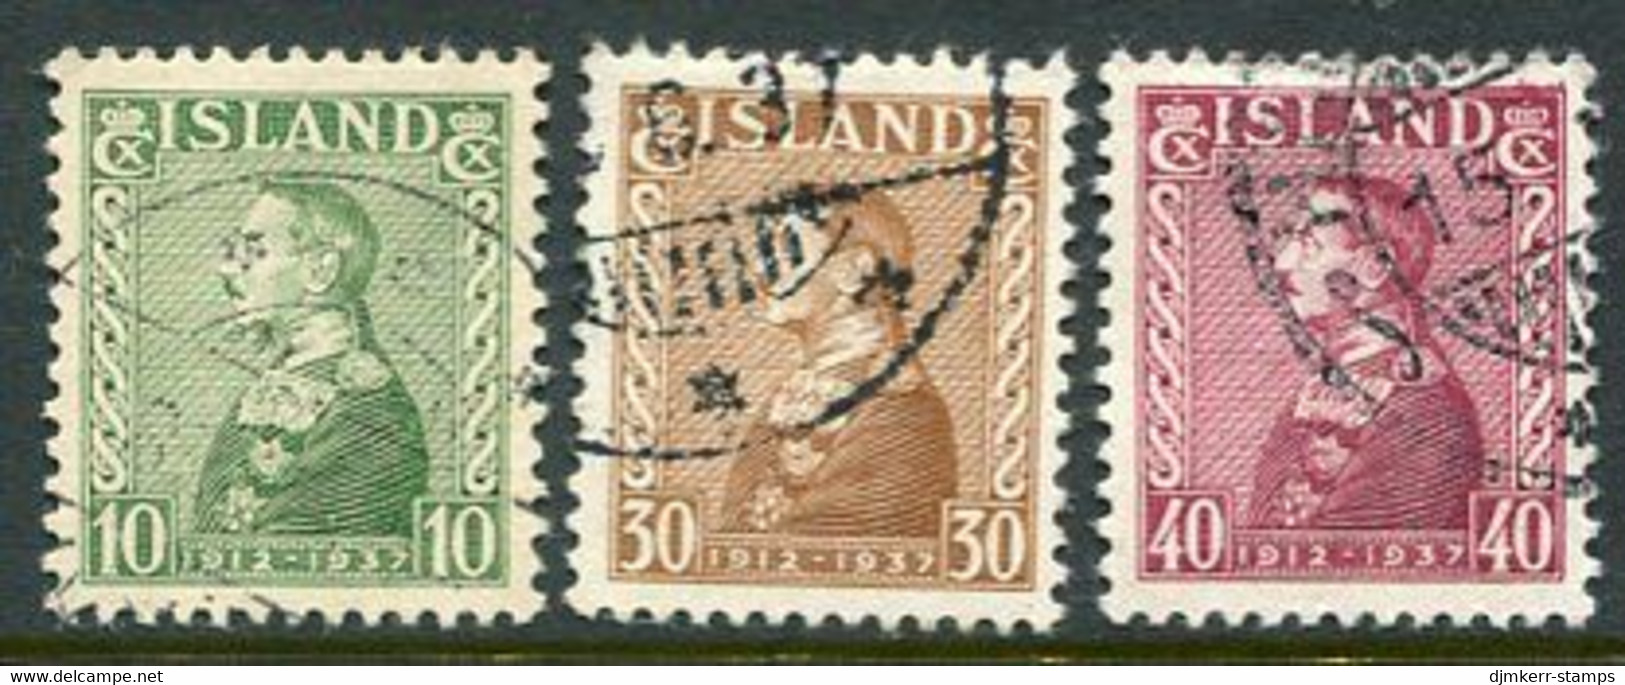 ICELAND  1937 25th Anniversary Of Regency Used.  Michel 187-189 - Usados